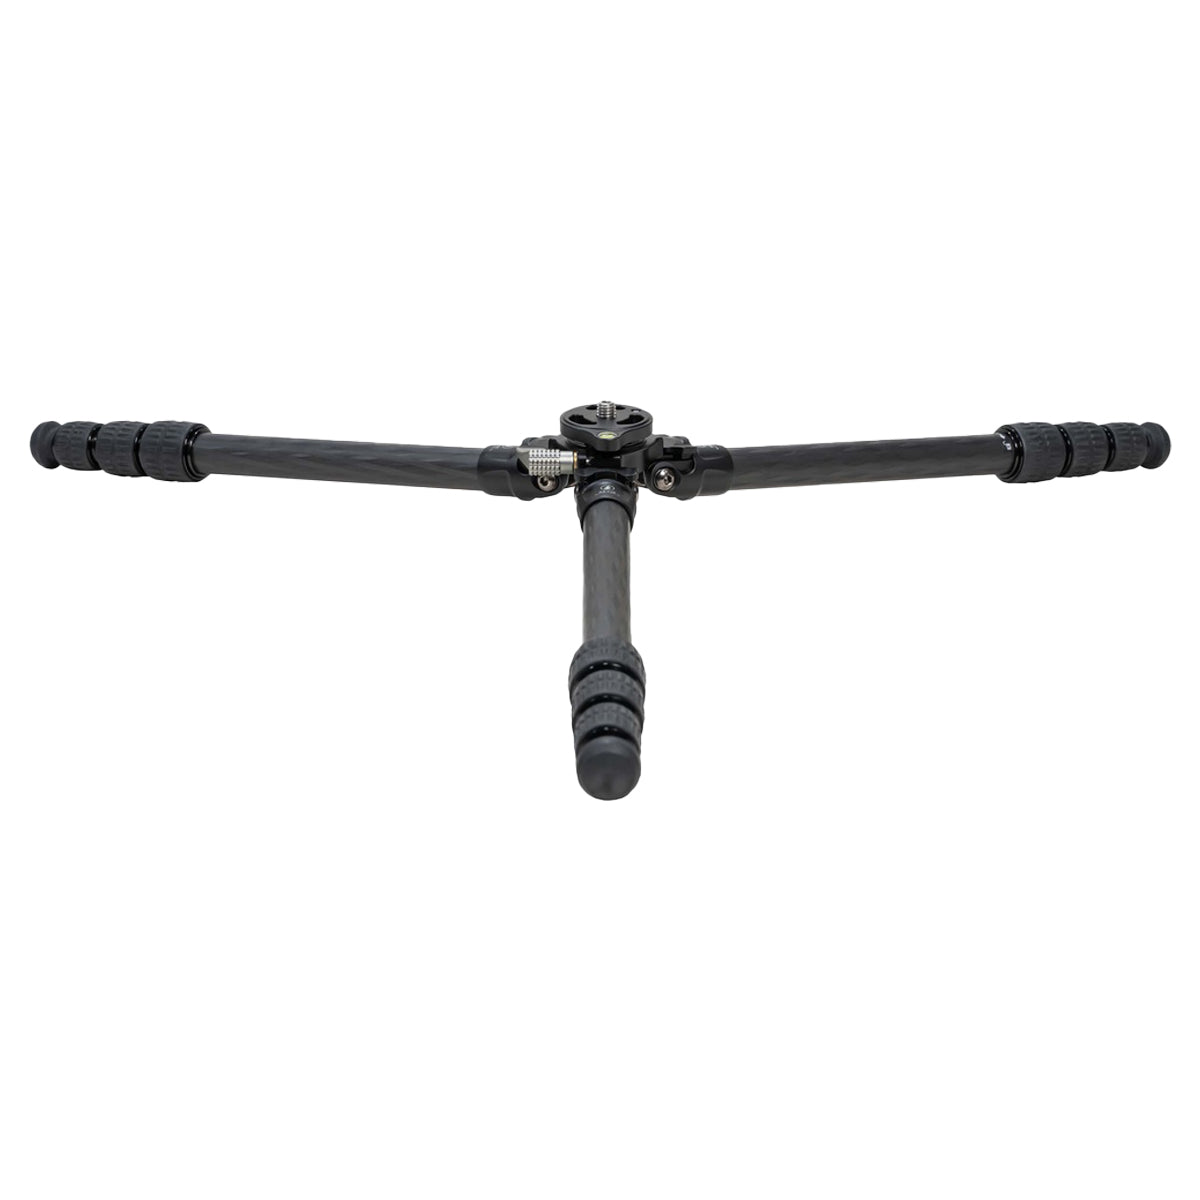 Revic Backpacker UL Tripod in  by GOHUNT | Revic - GOHUNT Shop